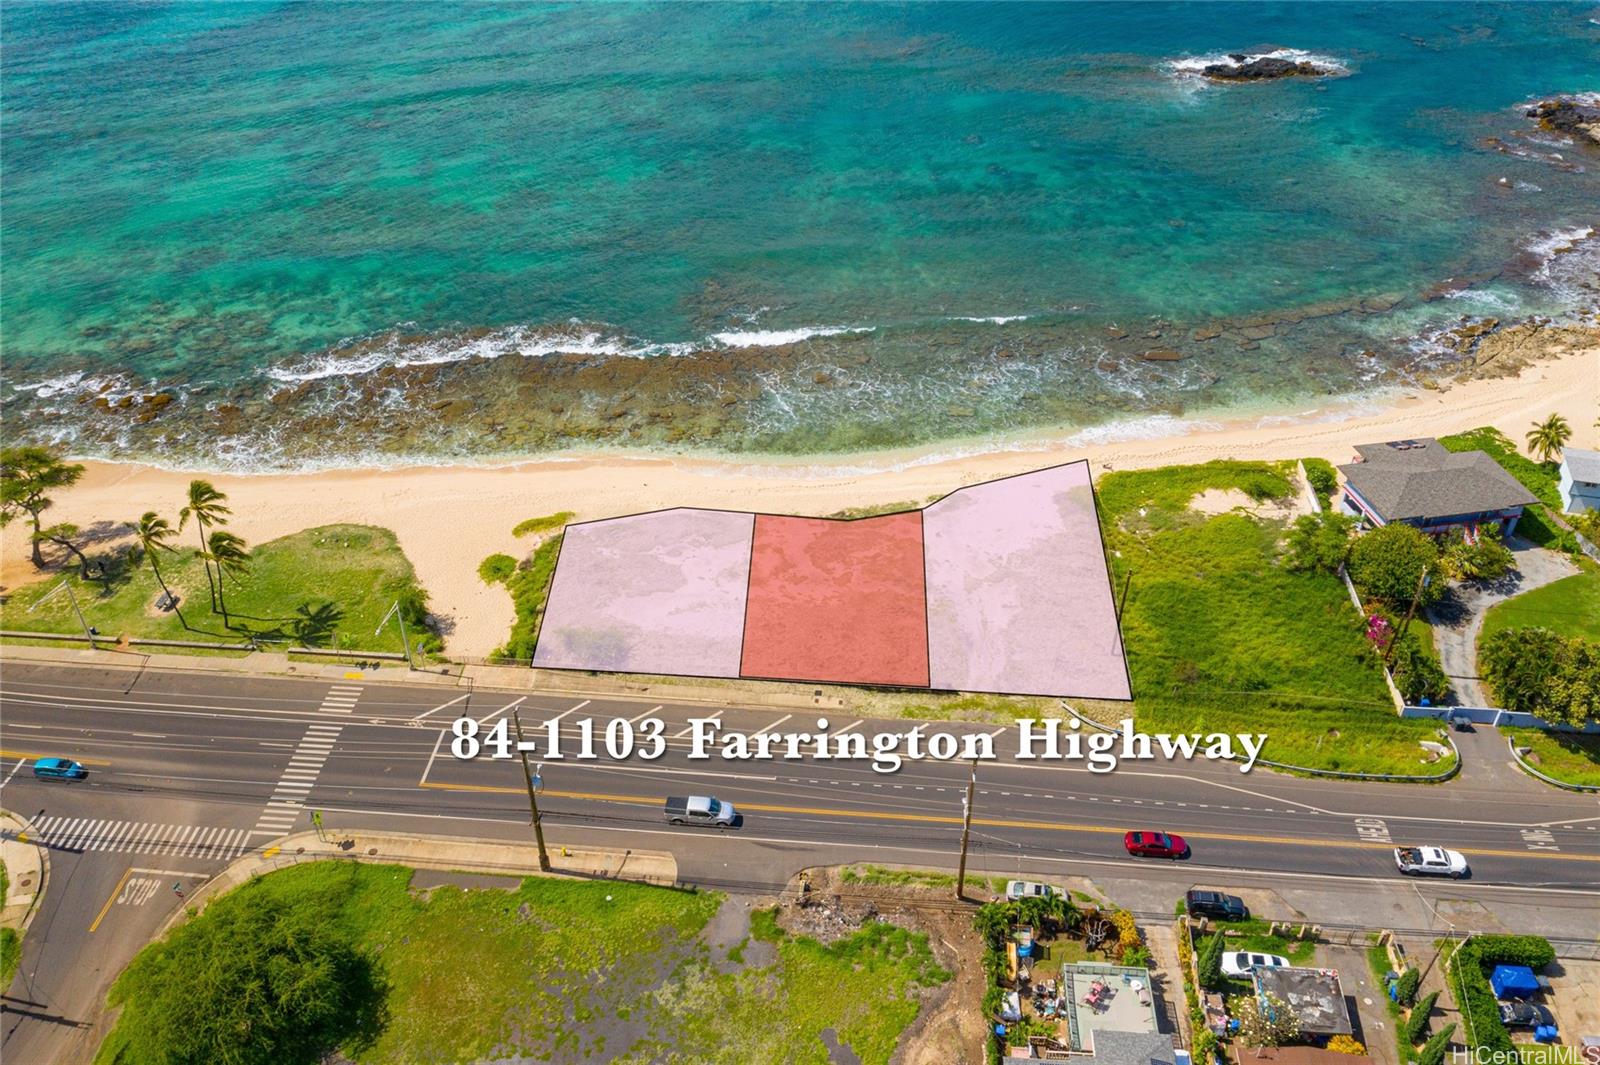 84-1103 Farrington Hwy  Waianae, Hi vacant land for sale - photo 14 of 23